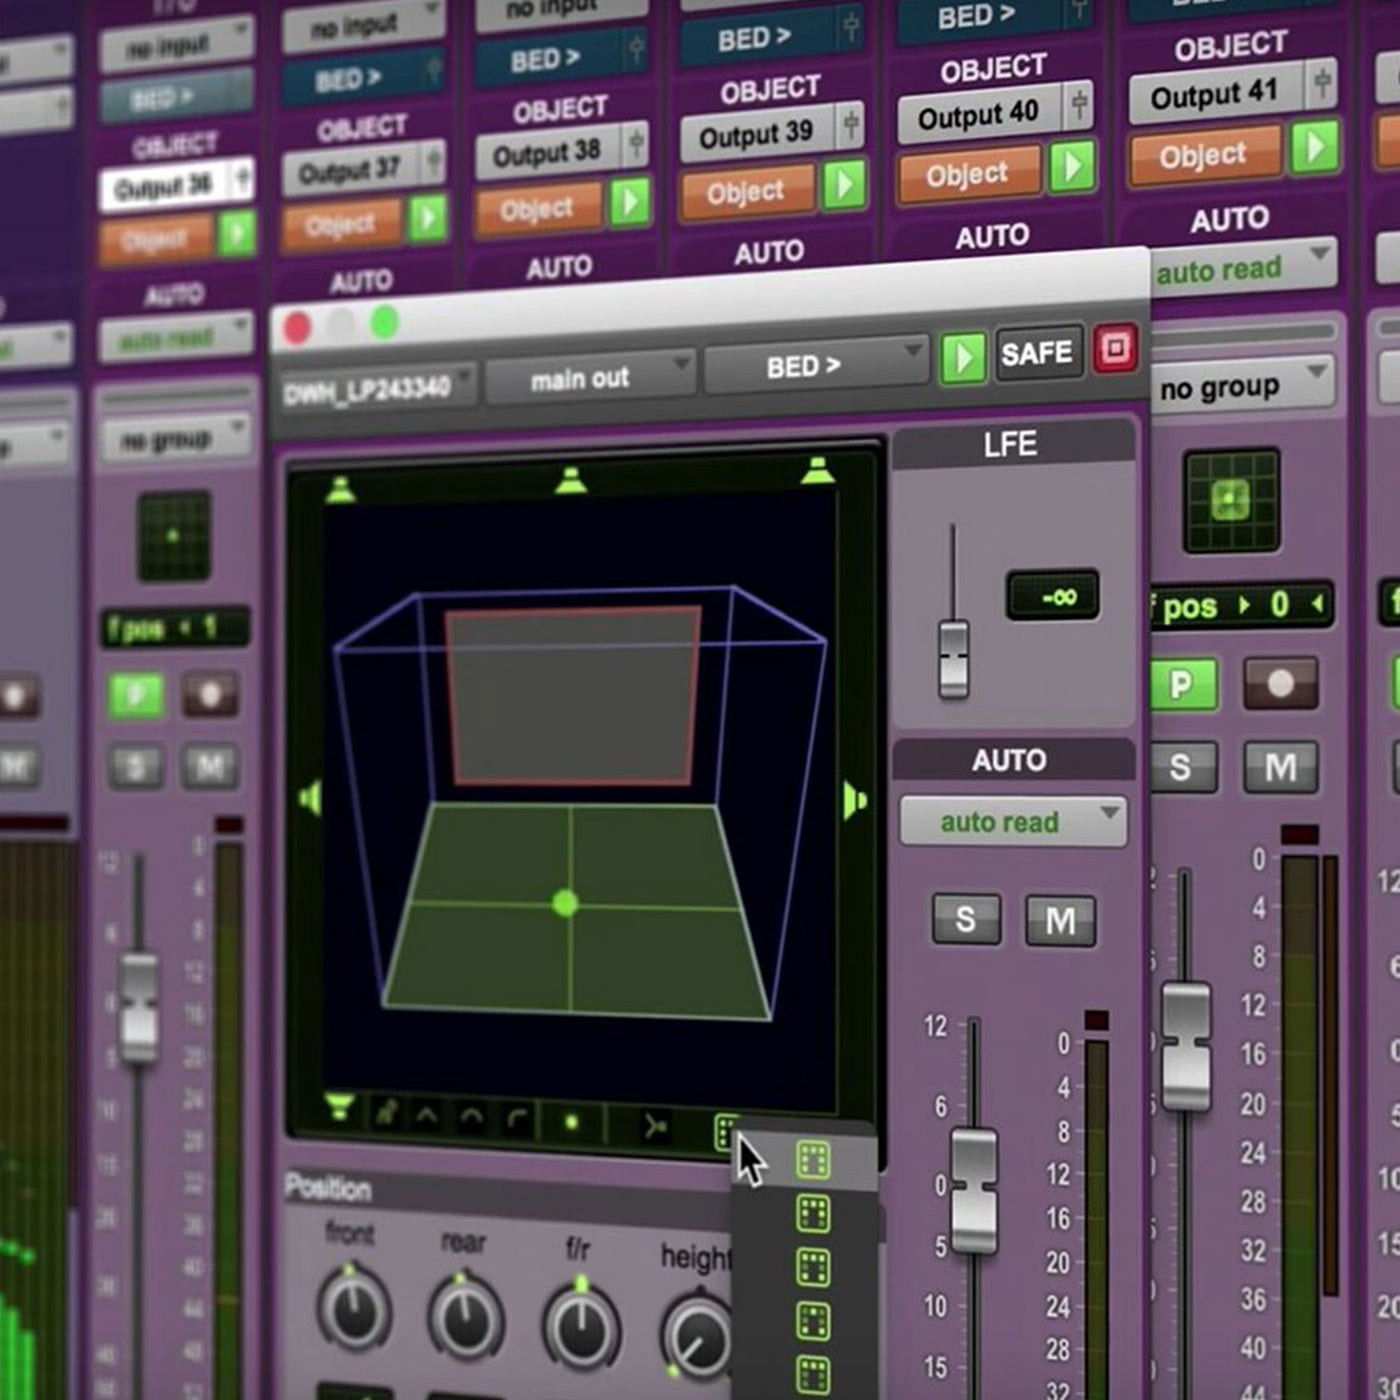 PRO TOOLS ULTIMATE CROSSGRADE FROM PERPETUA TO PT ULTIMATE 3Y